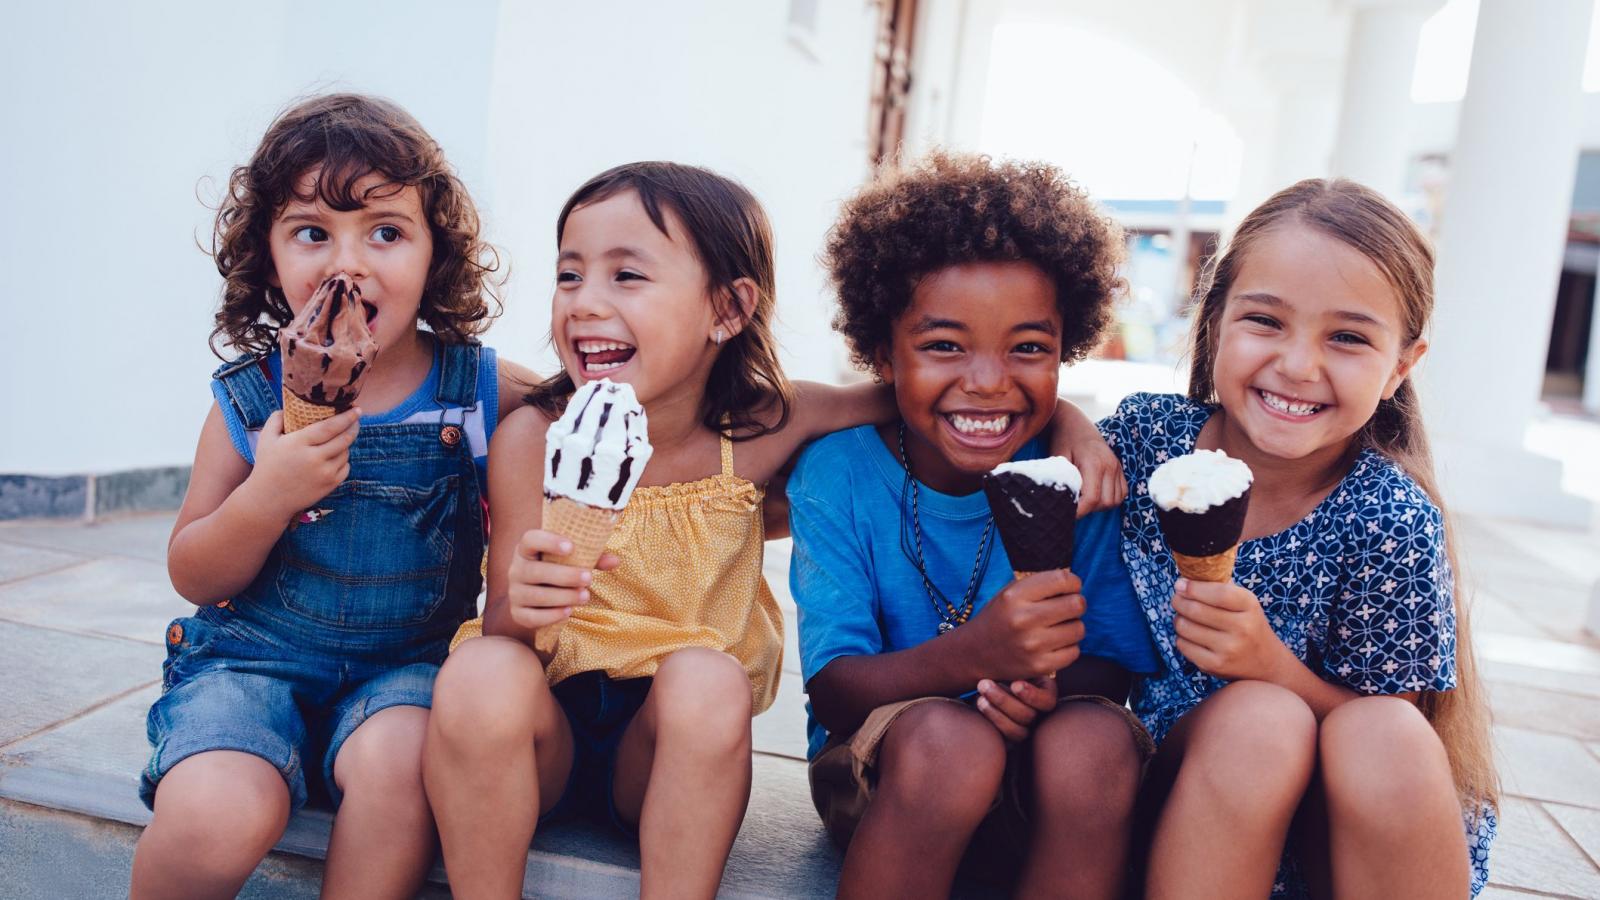 Four children sitting on a step and eating ice cream